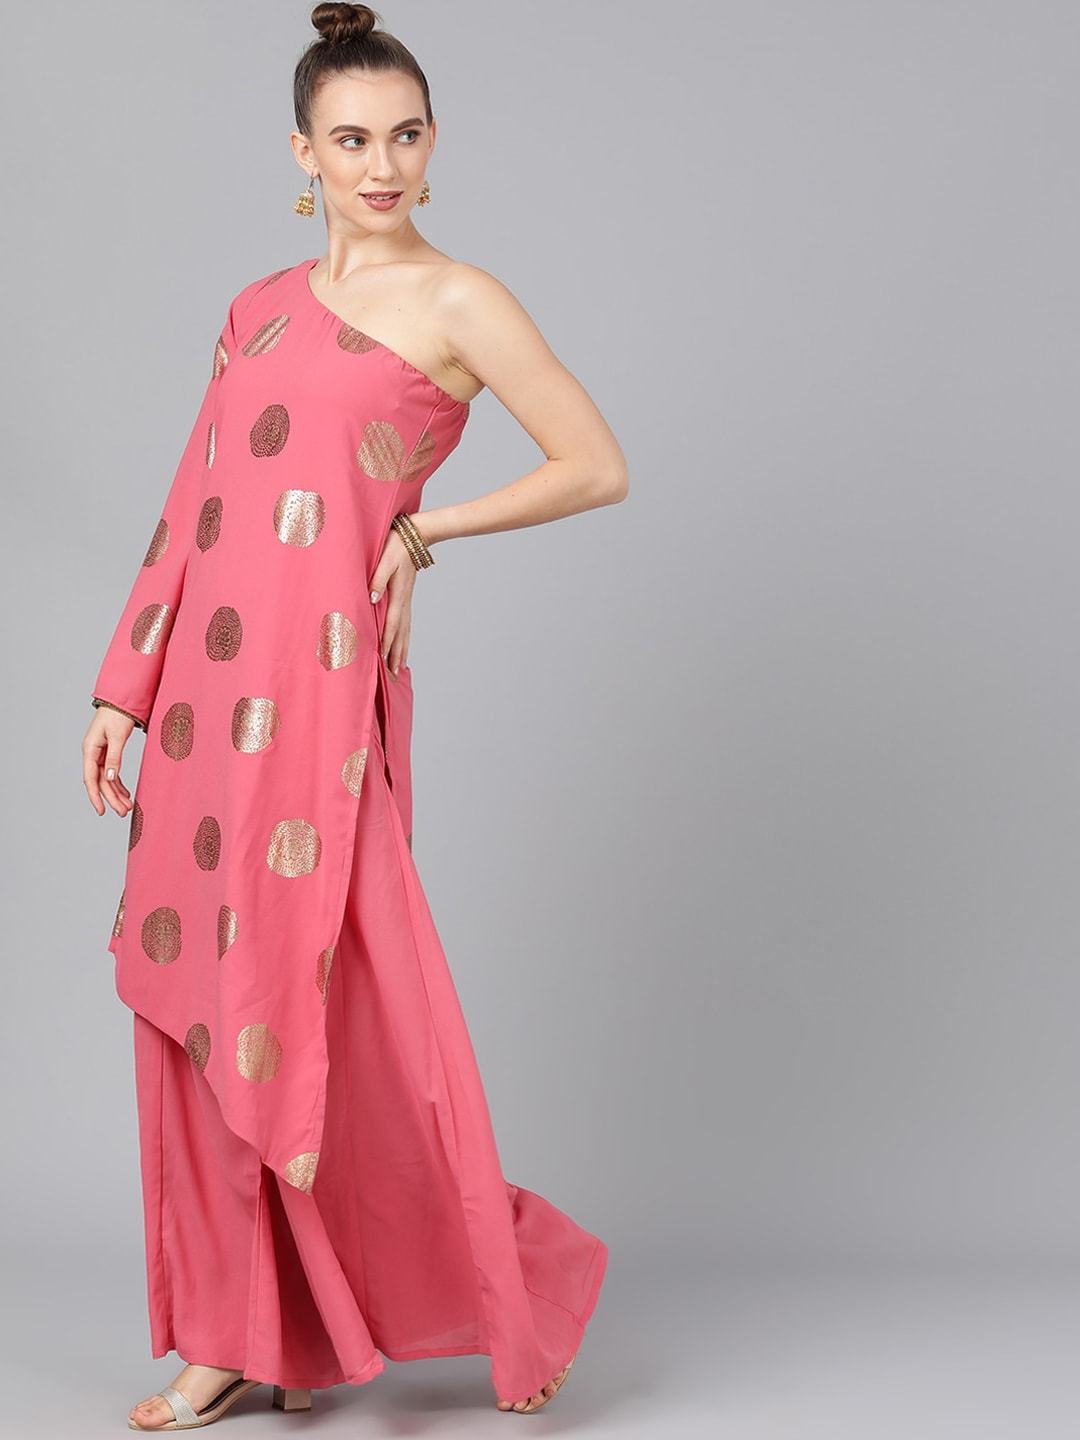 Women's  Pink & Gold-Coloured Foil Printed Kurta with Palazzos - AKS